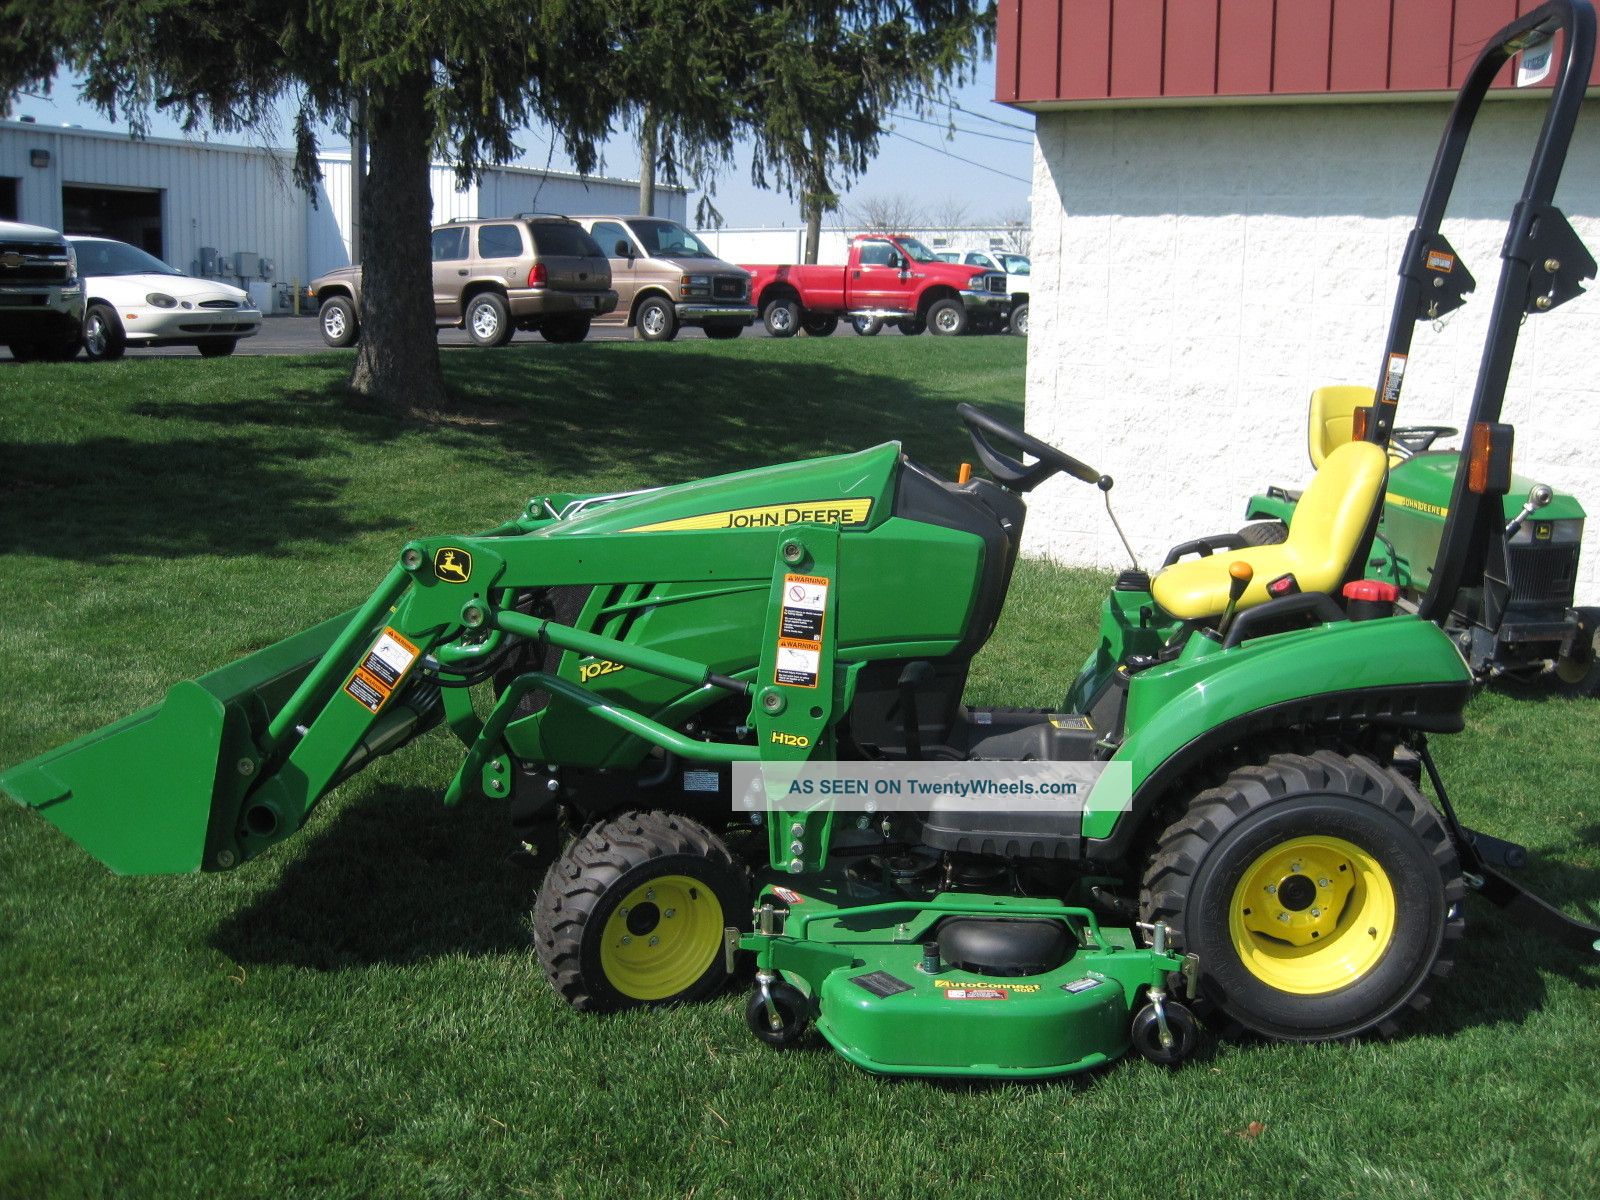 New John Deere 1 Series 1026r Sub Compact Tractor With ...